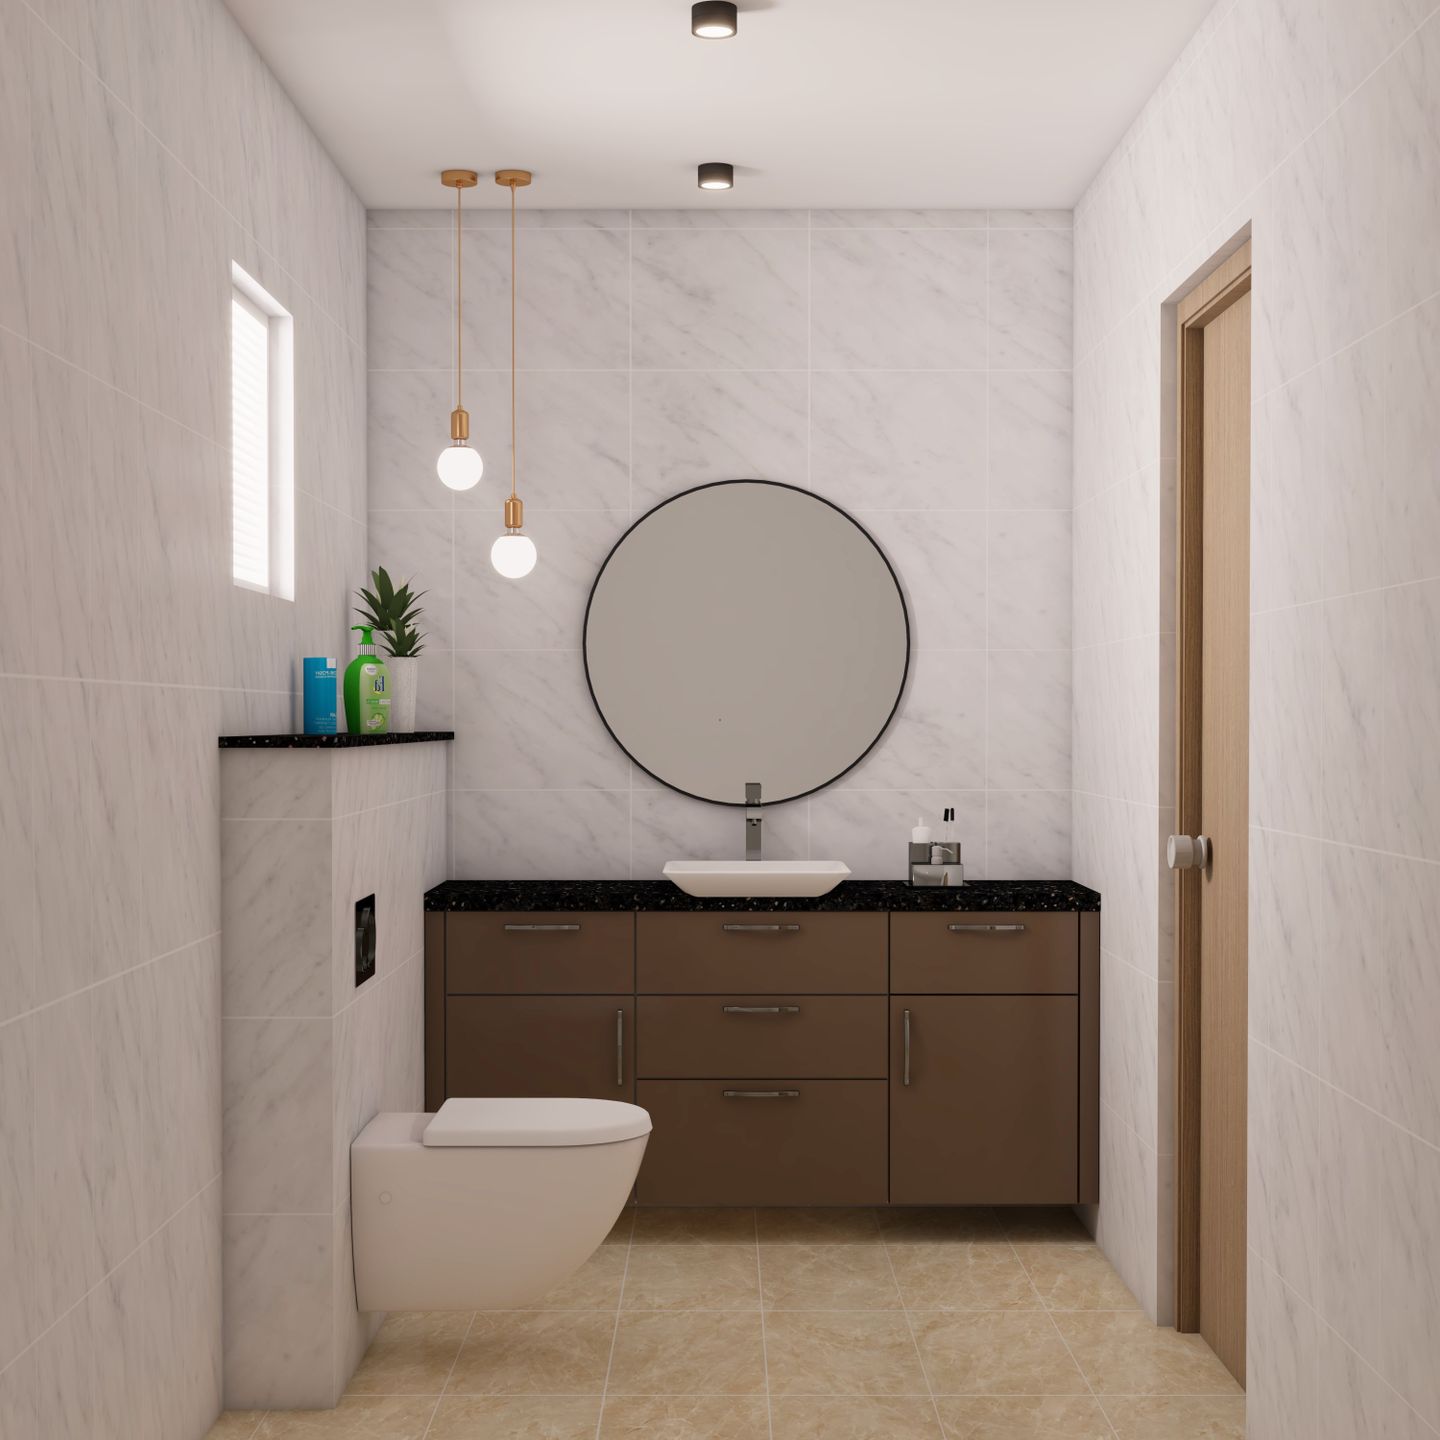 Contemporary White And Brown Bathroom Design With Brown Unit And Round Mirror - Livspace